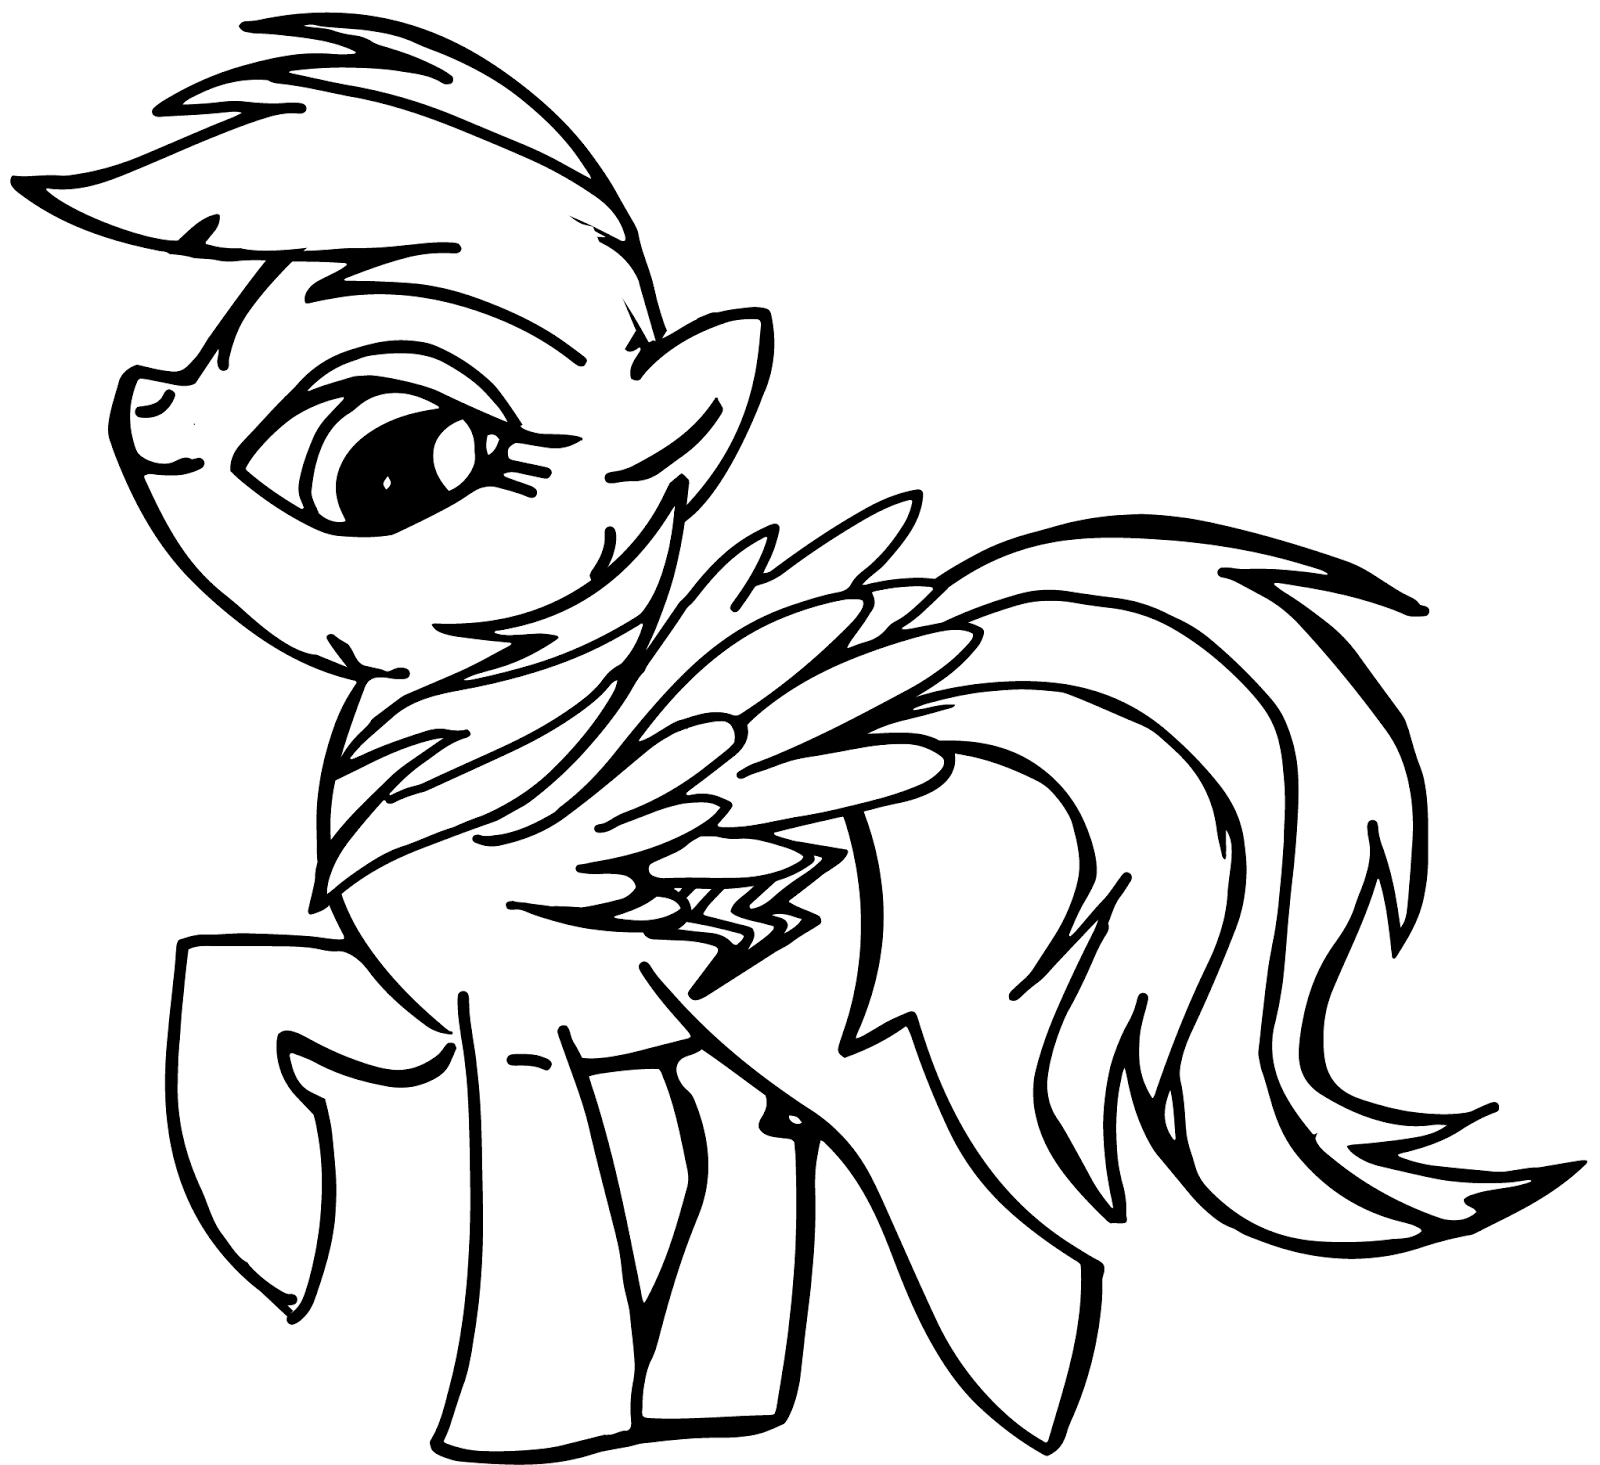 Original My Little Pony Coloring Pages at GetDrawings | Free download